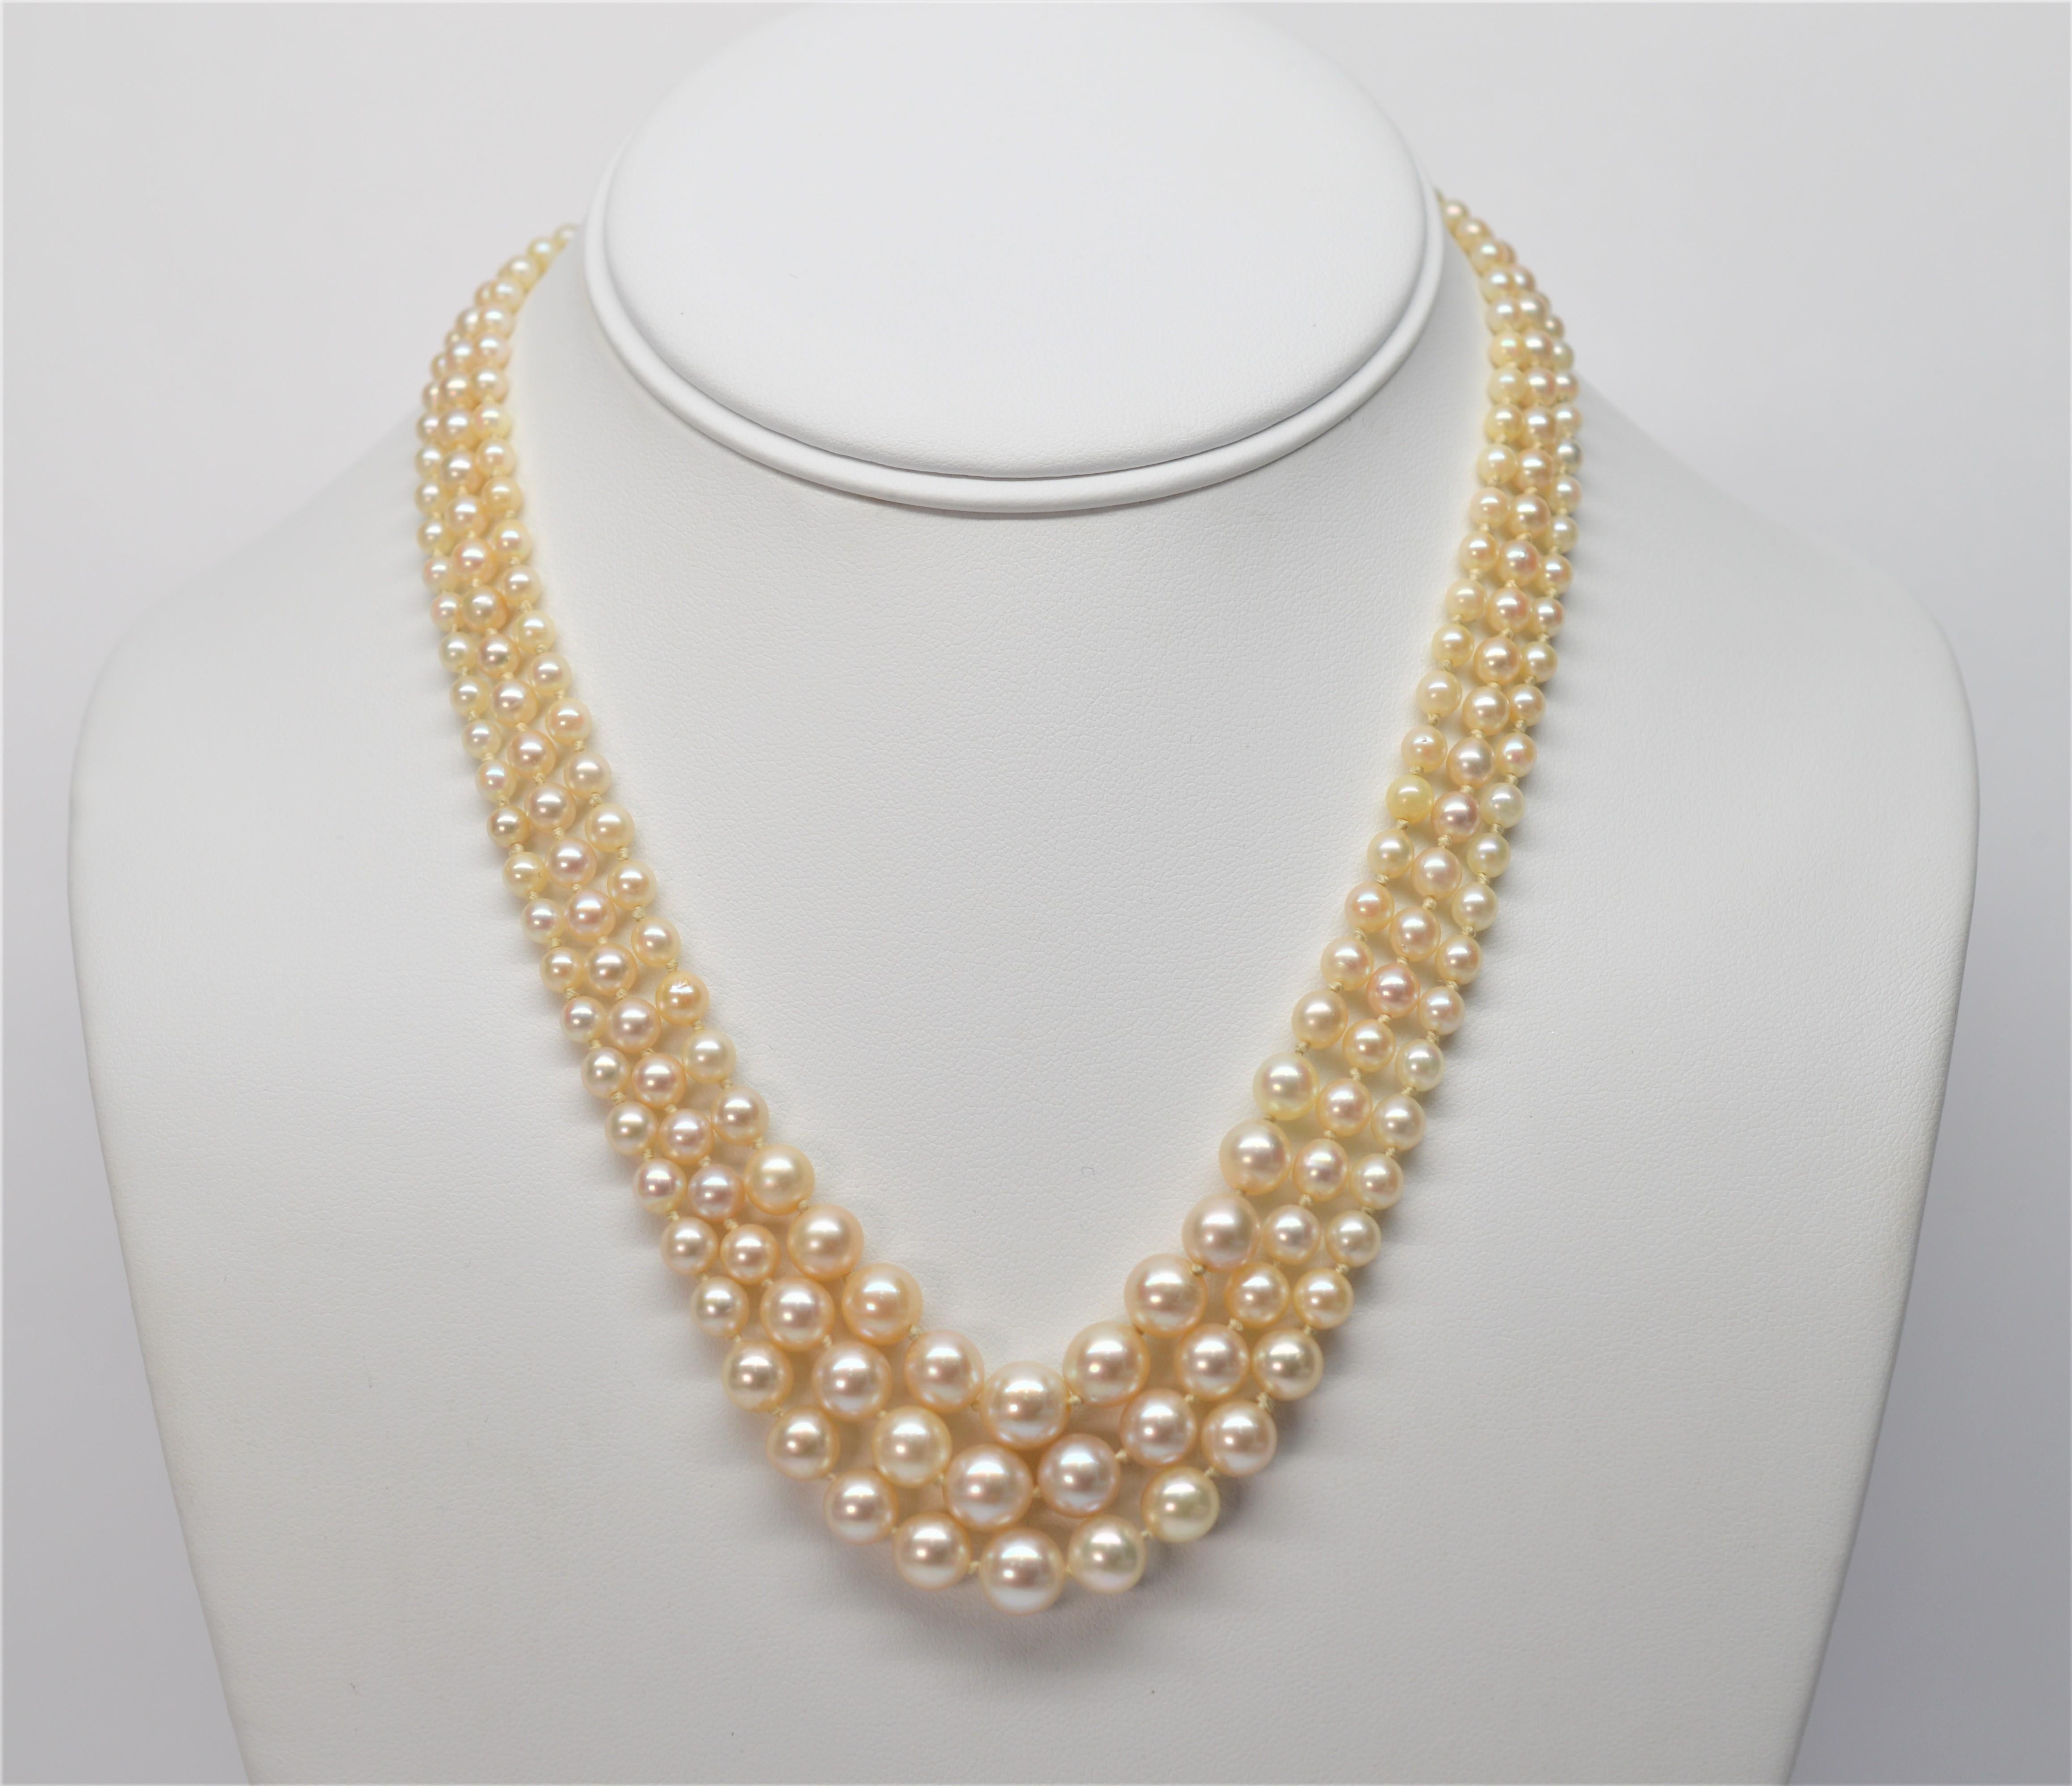 Three graduated strands of fine white lustrous Natural AA Akoya Pearls create this stunning quality Necklace. The hand-strung Pearls range in size from 3.5 mm to 8.25mm. The Pearls are dressed with a beautiful charm clasp made of 14K Yellow Gold &